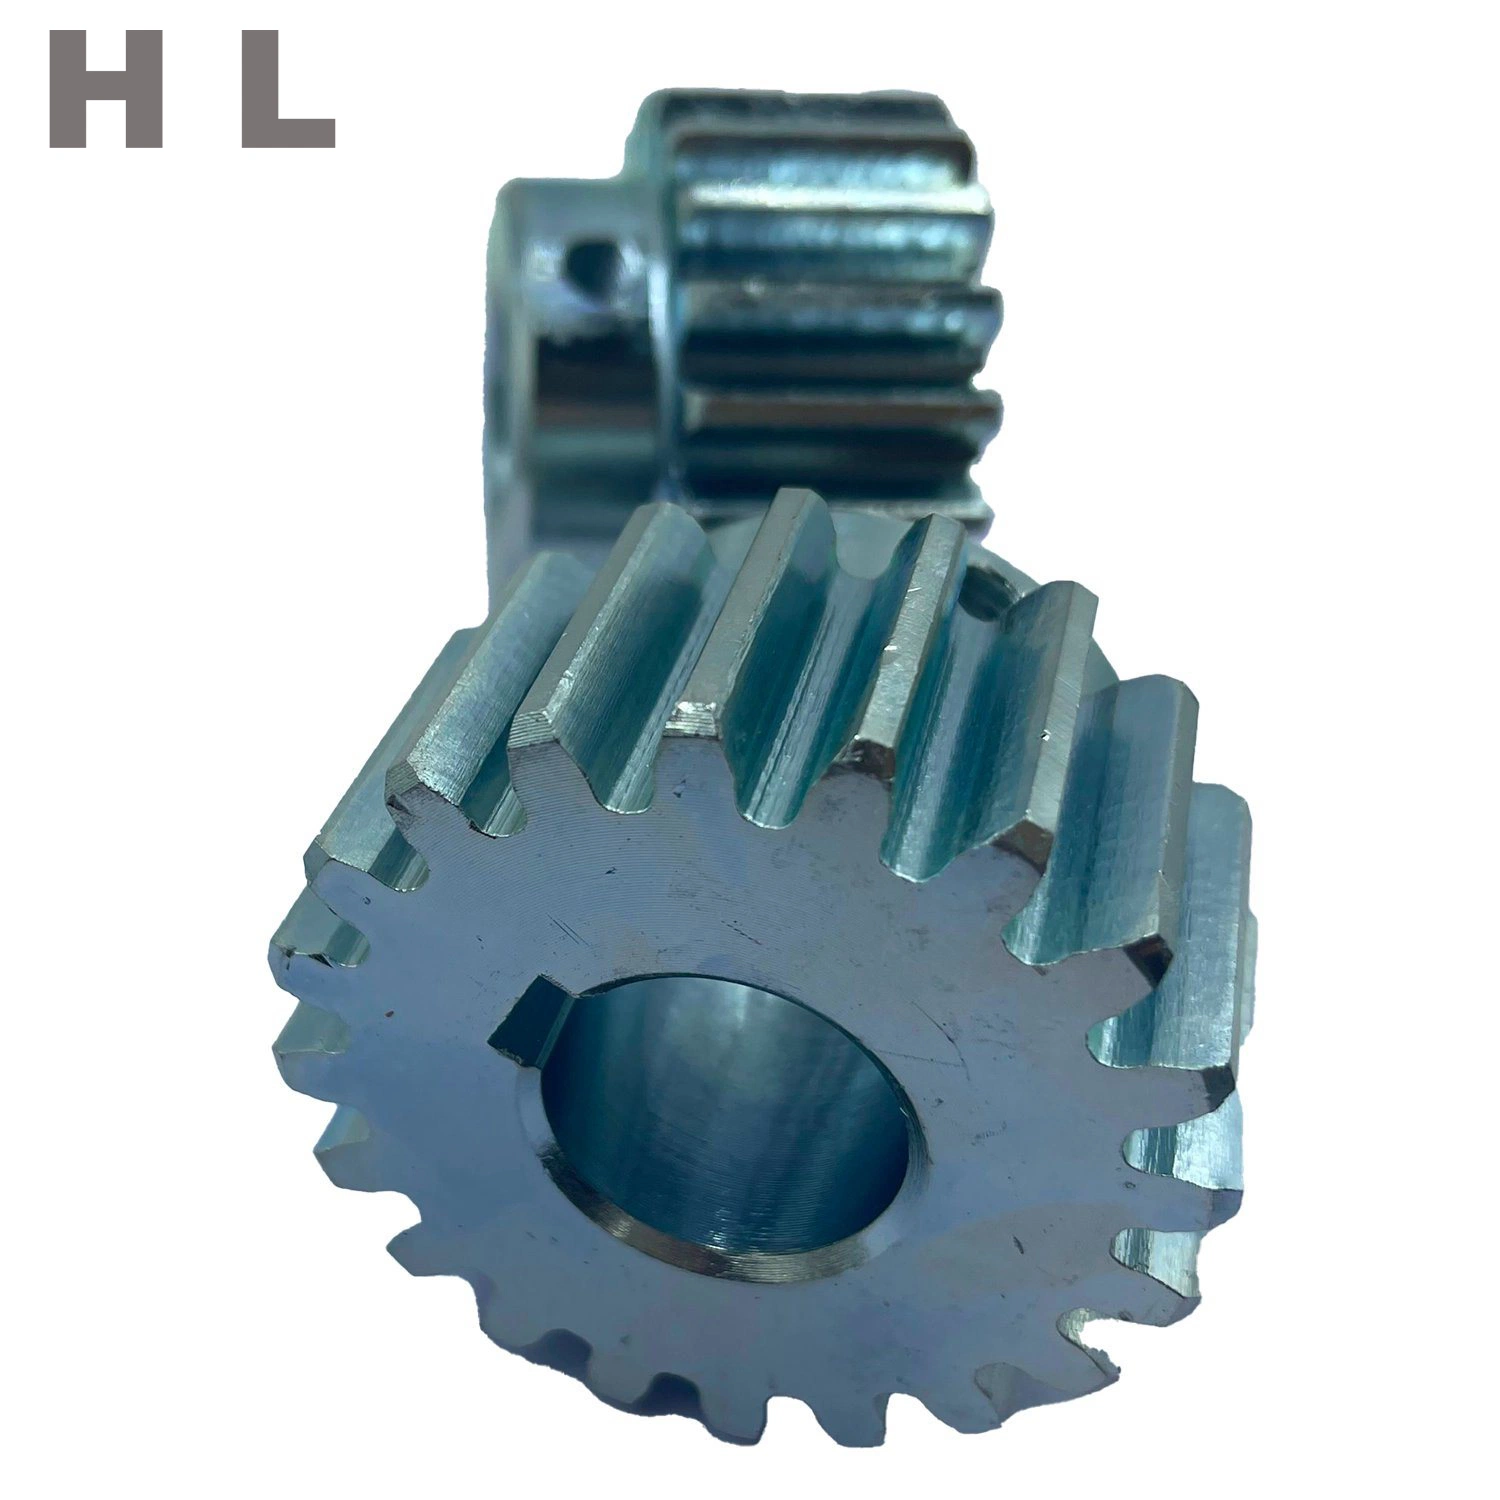 High Precision Manufacturer Steel /Pinion/Straight/Helical Spur/Planetary/Transmission/Starter/ CNC Machining/Drive Gear